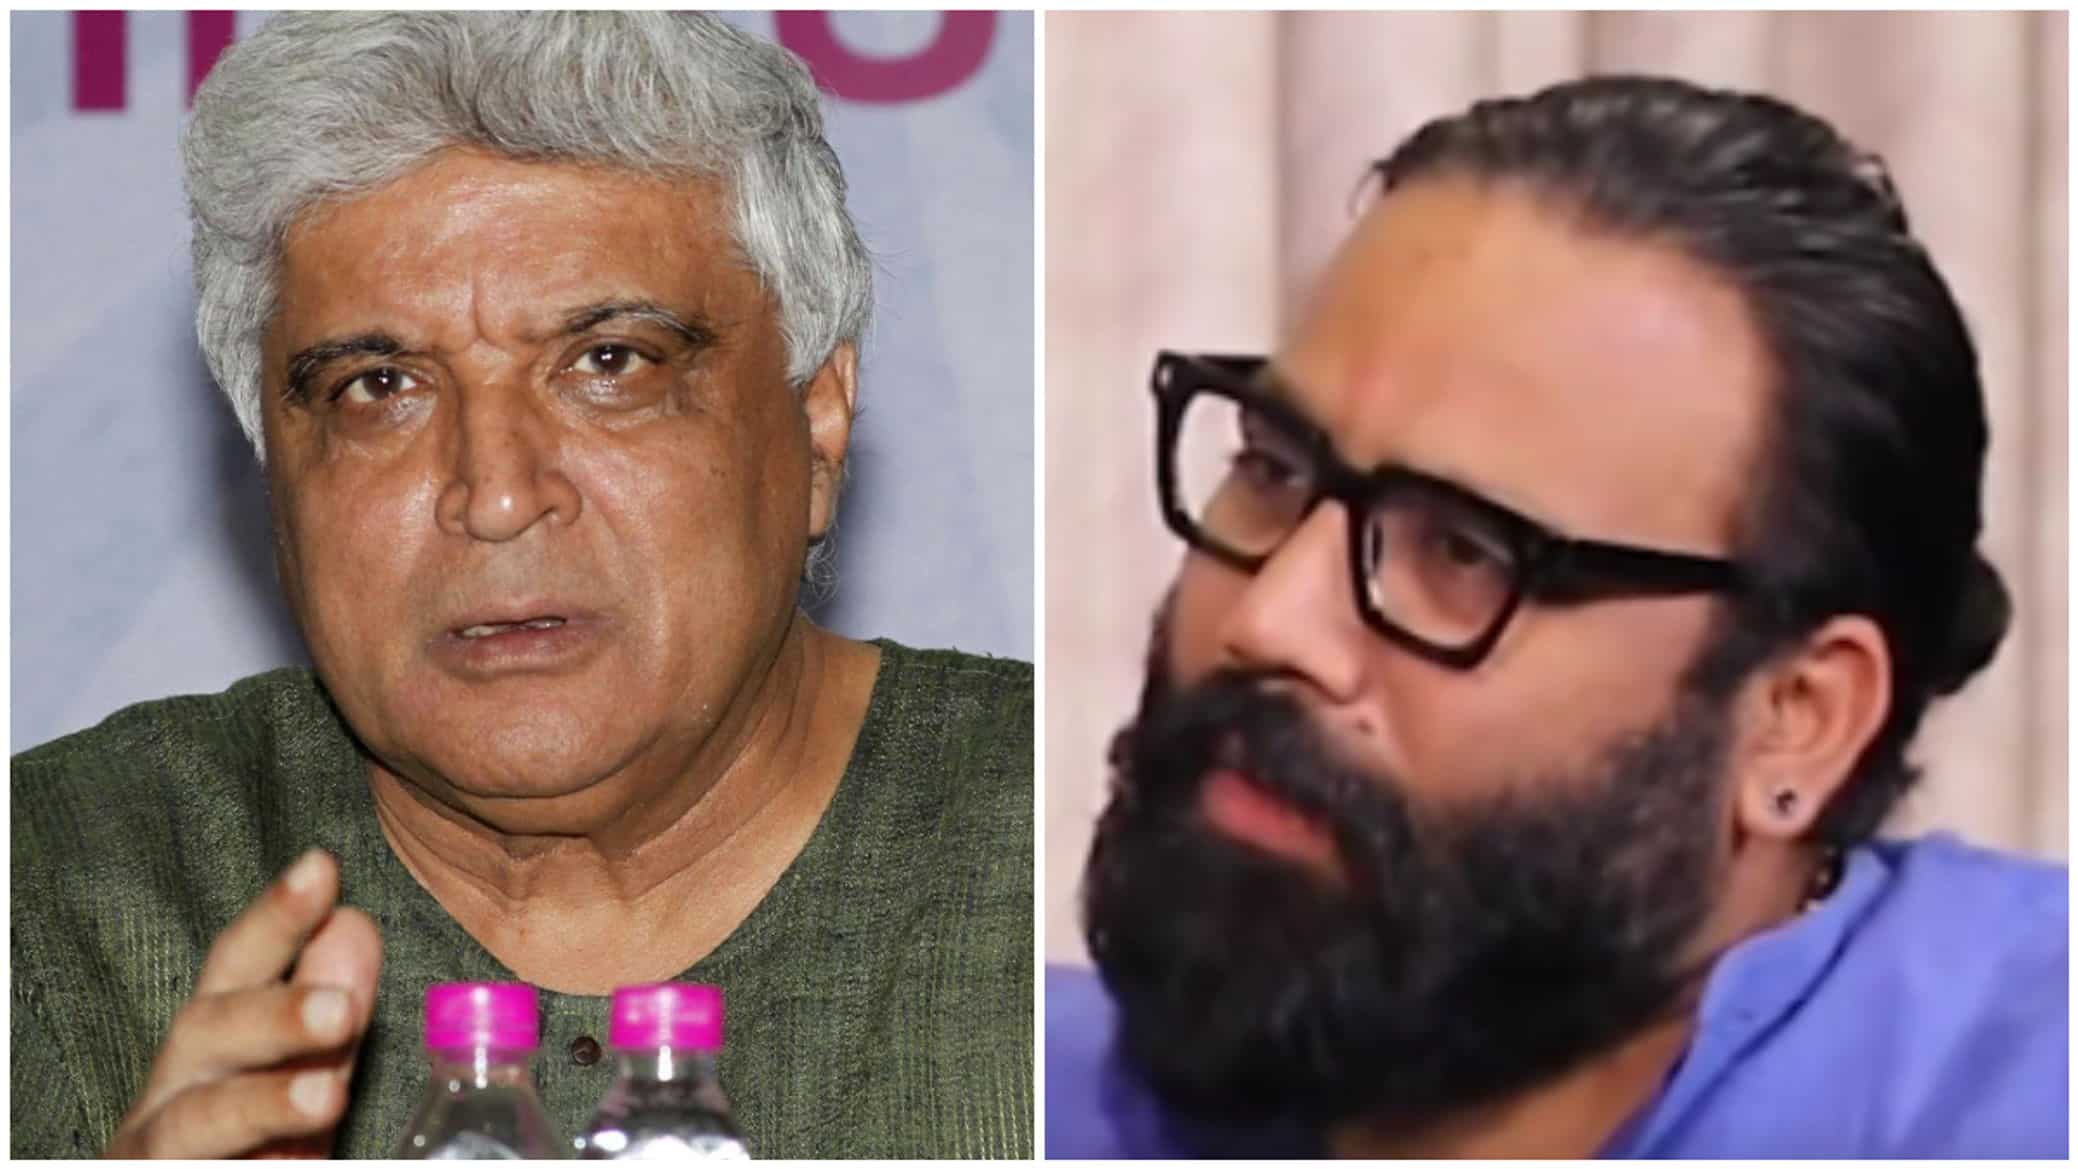 https://www.mobilemasala.com/film-gossip/Animal---Sandeep-Reddy-Vanga-slams-Javed-Akhtar-for-commenting-ill-about-the-film-says-See-Mirzapur-first-then-i212501